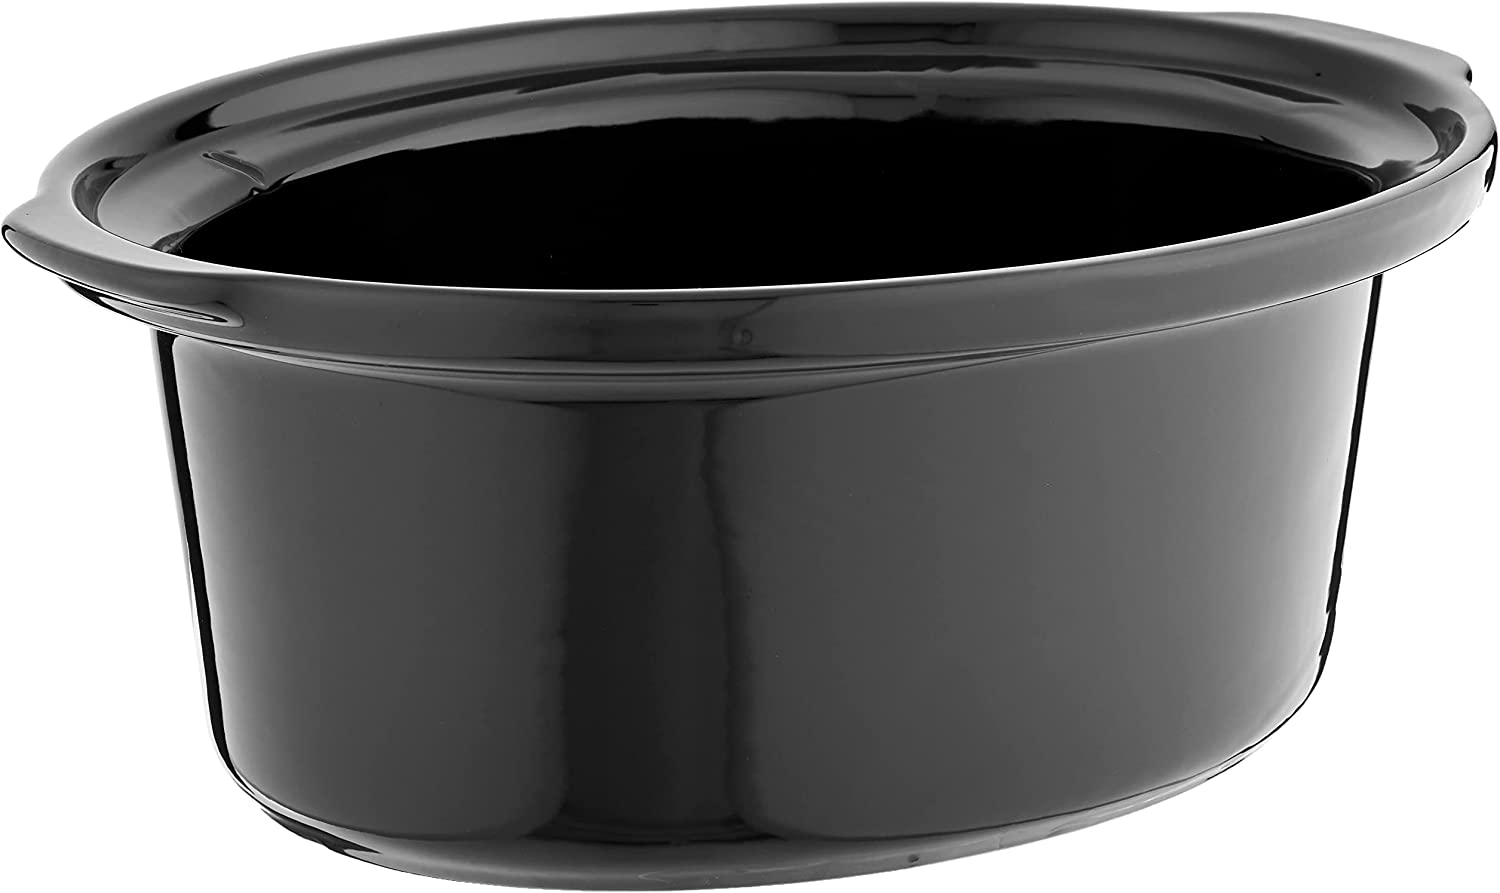 https://discounttoday.net/wp-content/uploads/2022/11/Crock-Pot-SCV803-SS-Large-8-Quart-Slow-Cooker-with-Mini-16-Ounce-Food-Warmer-Stainless-Steel1.jpg